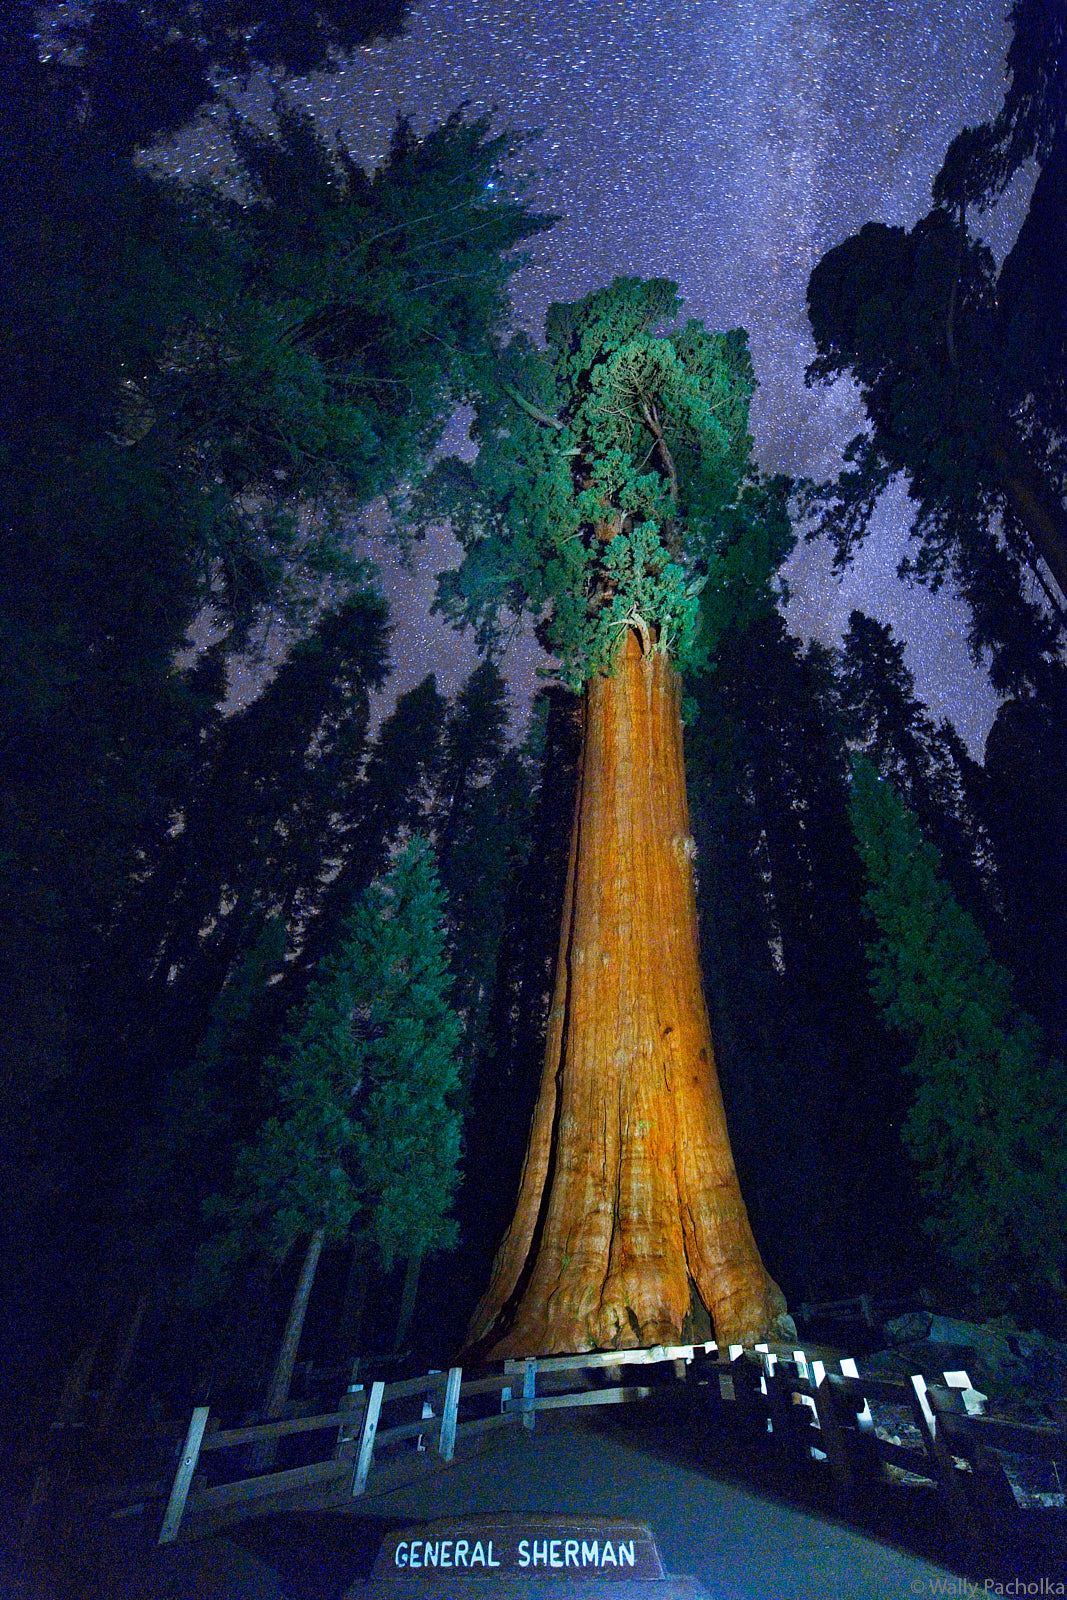 The stars shine brightly above the giant General Sherman Tree in Sequoia National Park.